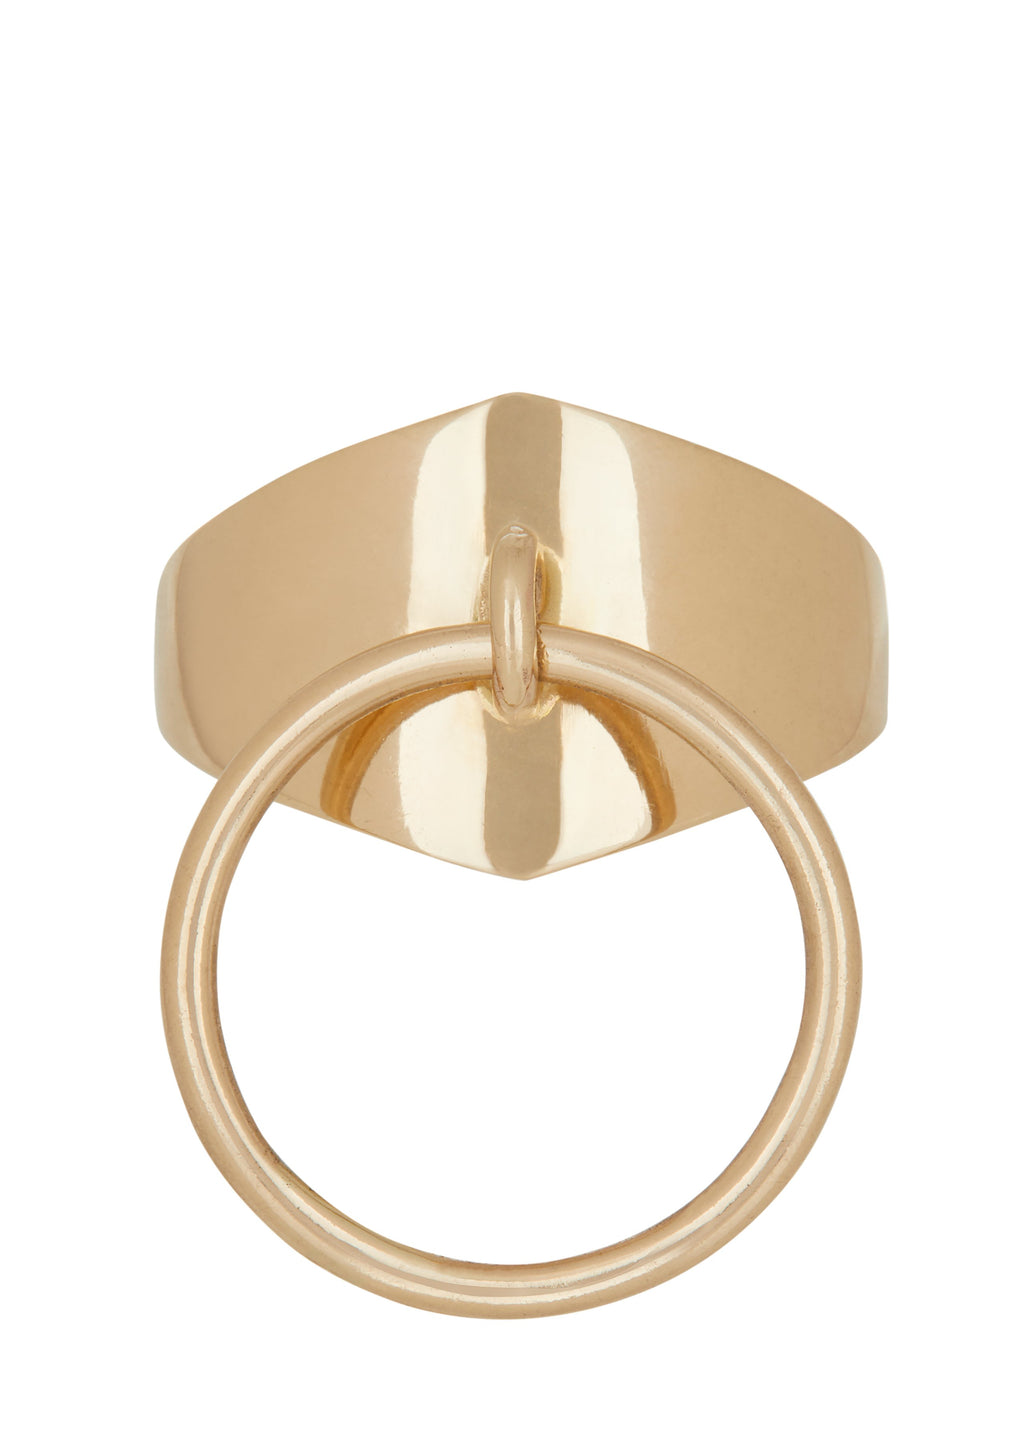 Odalisque Ring in 14k